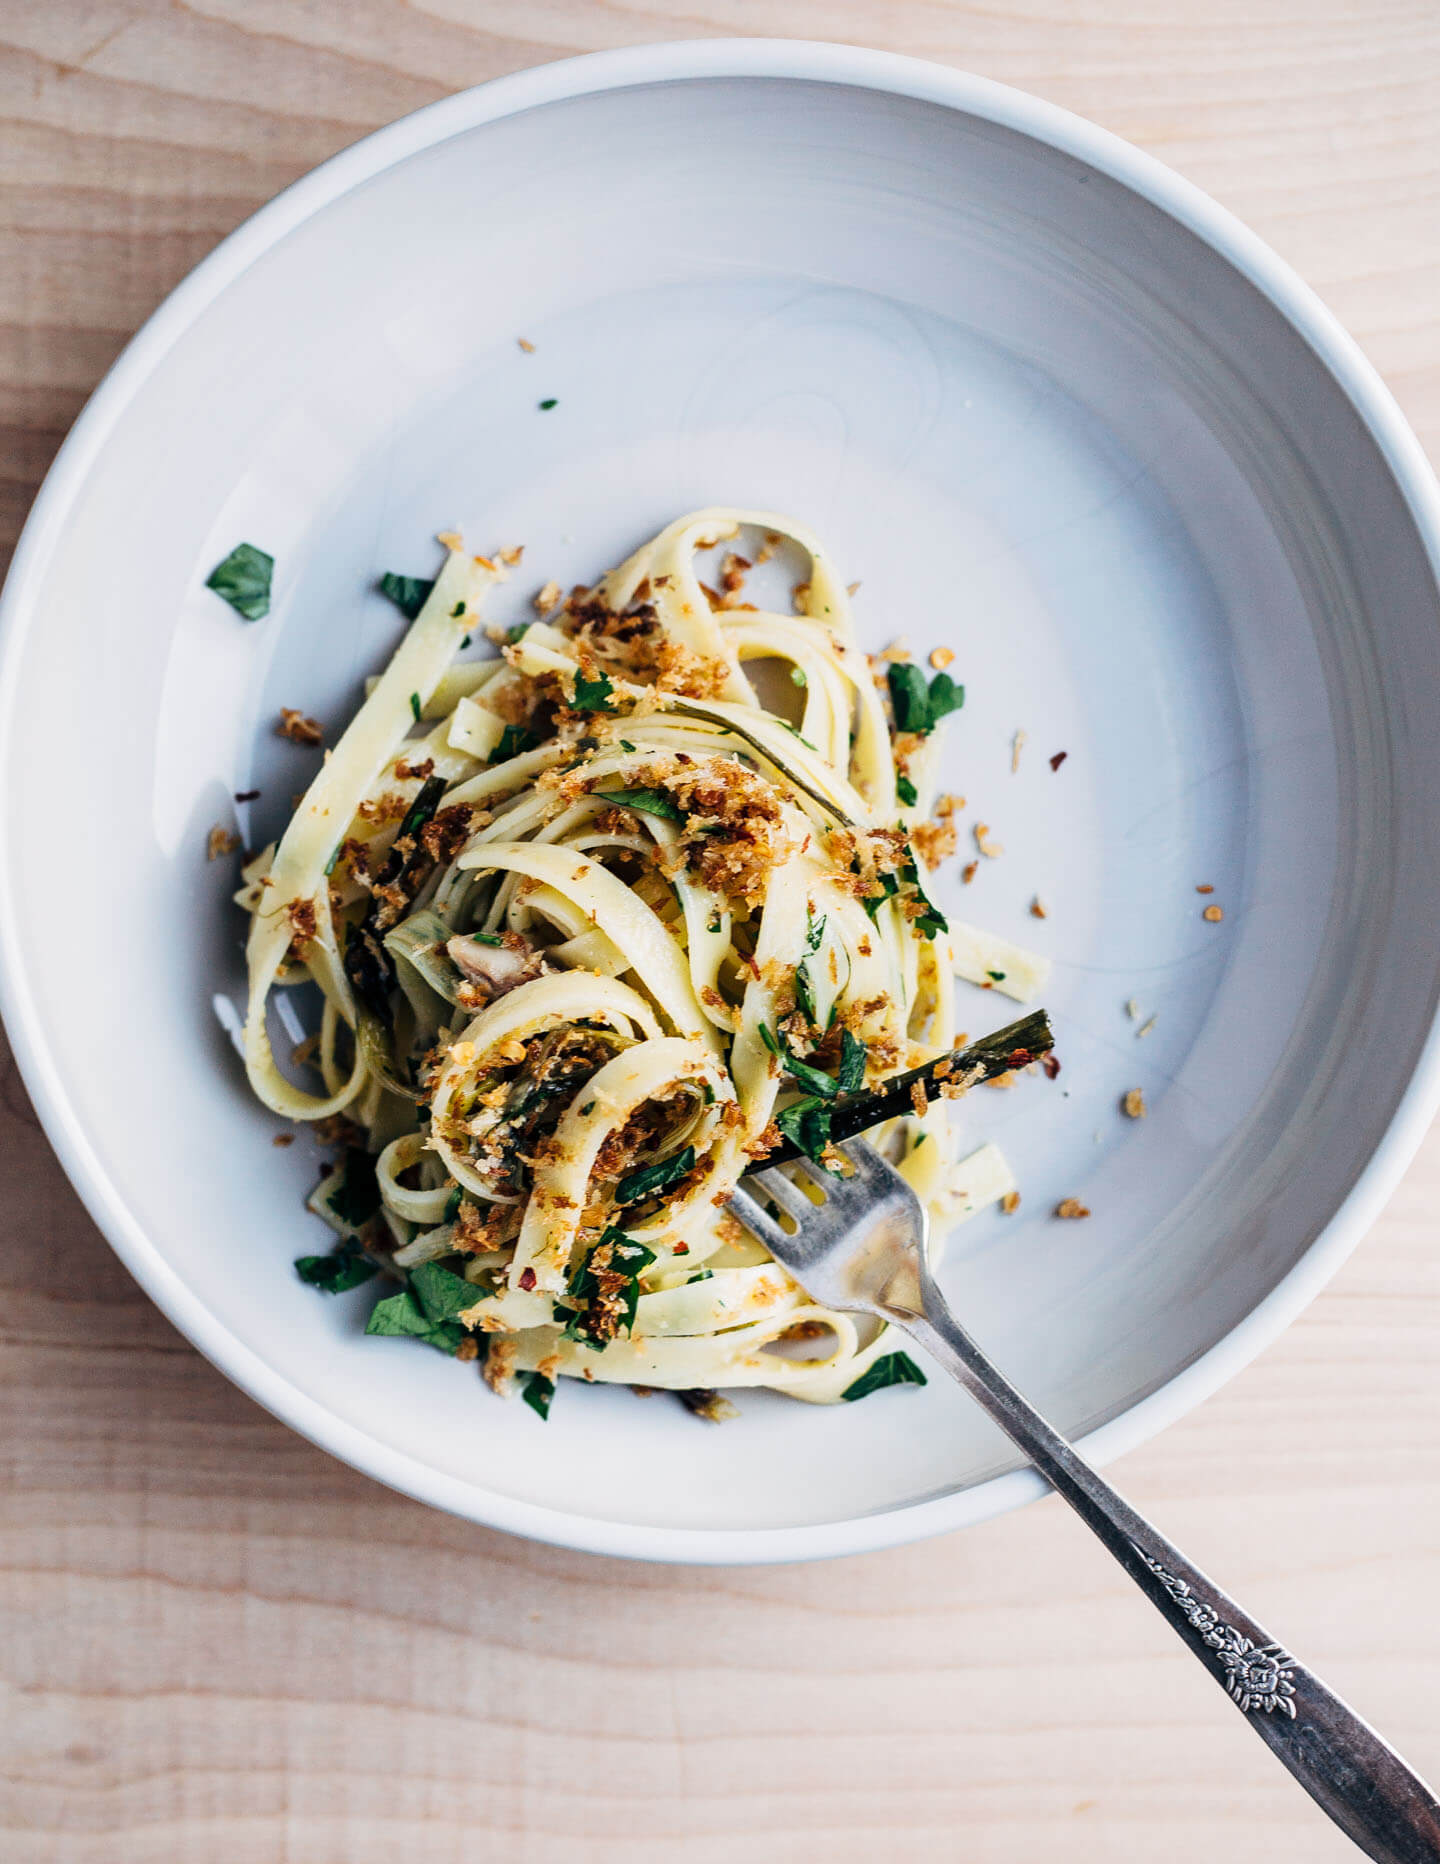 A hearty dish for early spring that's at once briny, rich, and herbaceous. Fettuccine noodles are tossed with delicate roasted spring onions, capers, herbs, tinned sardines, and buttery panko for a meal that's deeply satisfying. 